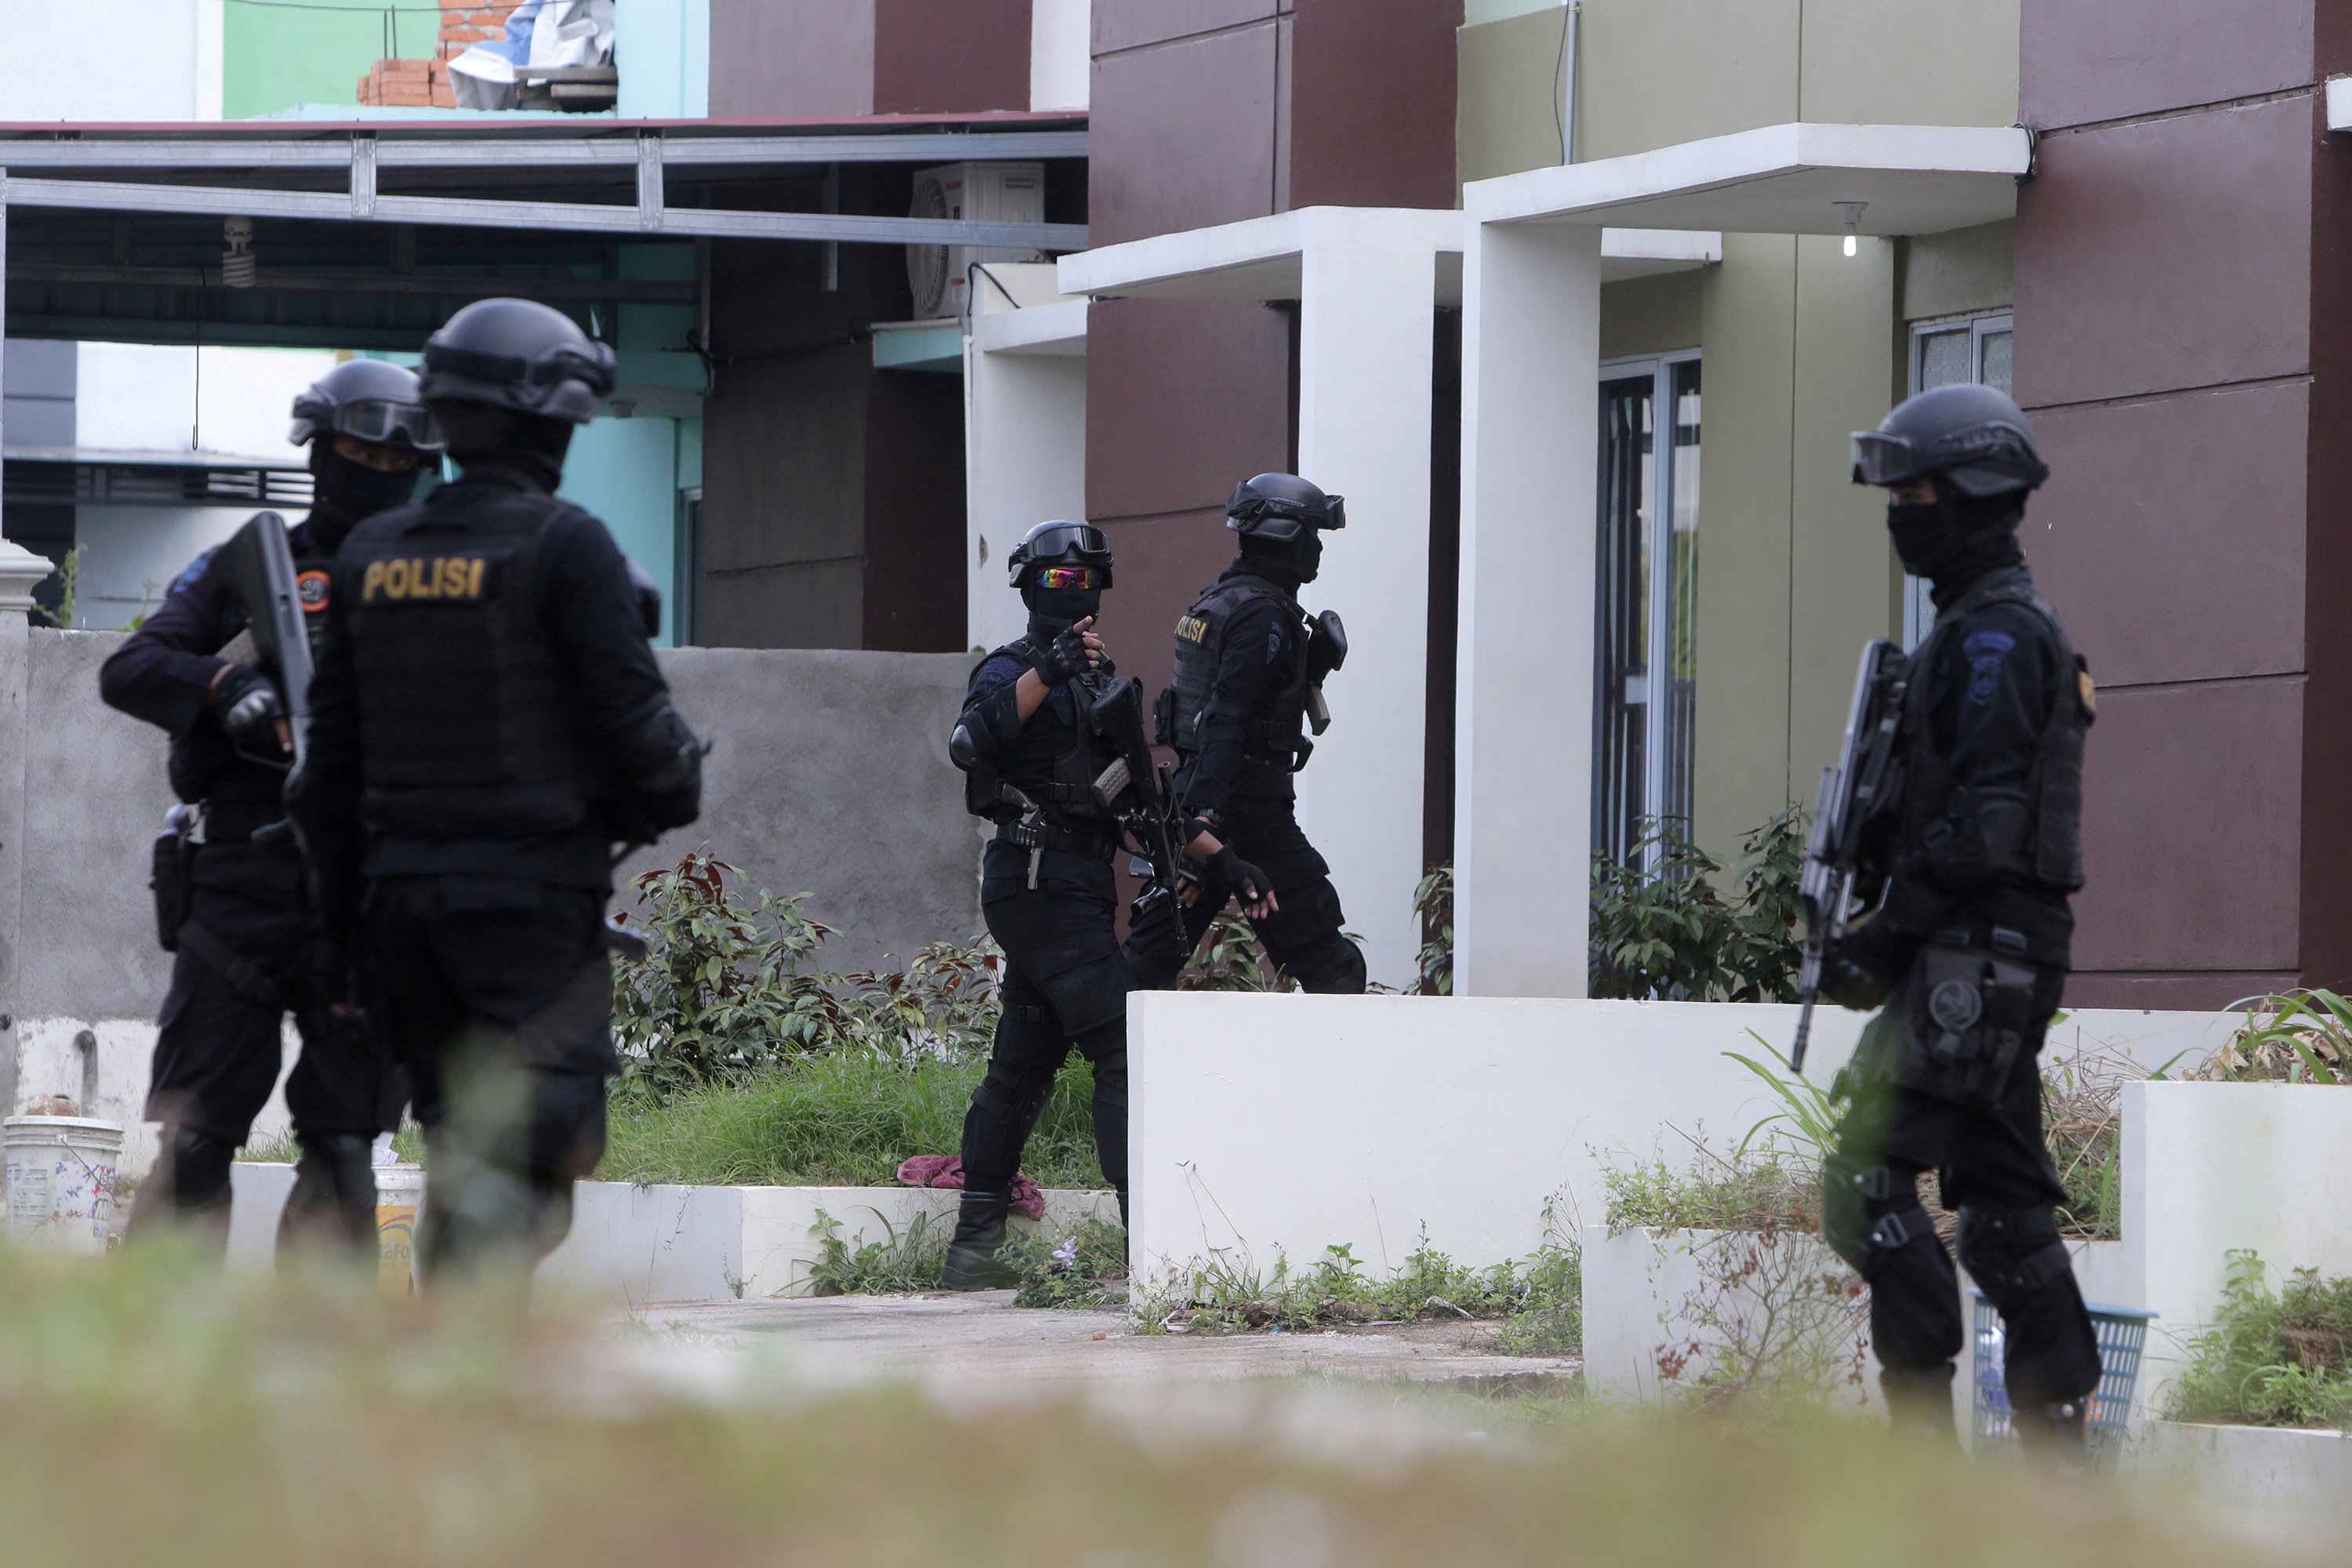 FILE PHOTO: Indonesian anti-terror police from Detachment 88 are seen entering a building during a raid in Batam, Riau Islands, Indonesia, August 5, 2016 in this photo taken by Antara Foto. Antara Foto/M N Kanwa/via REUTERS/File Photo ATTENTION EDITORS - THIS IMAGE HAS BEEN SUPPLIED BY A THIRD PARTY. EDITORIAL USE ONLY. MANDATORY CREDIT. INDONESIA OUT. NO COMMERCIAL OR EDITORIAL SALES IN INDONESIA